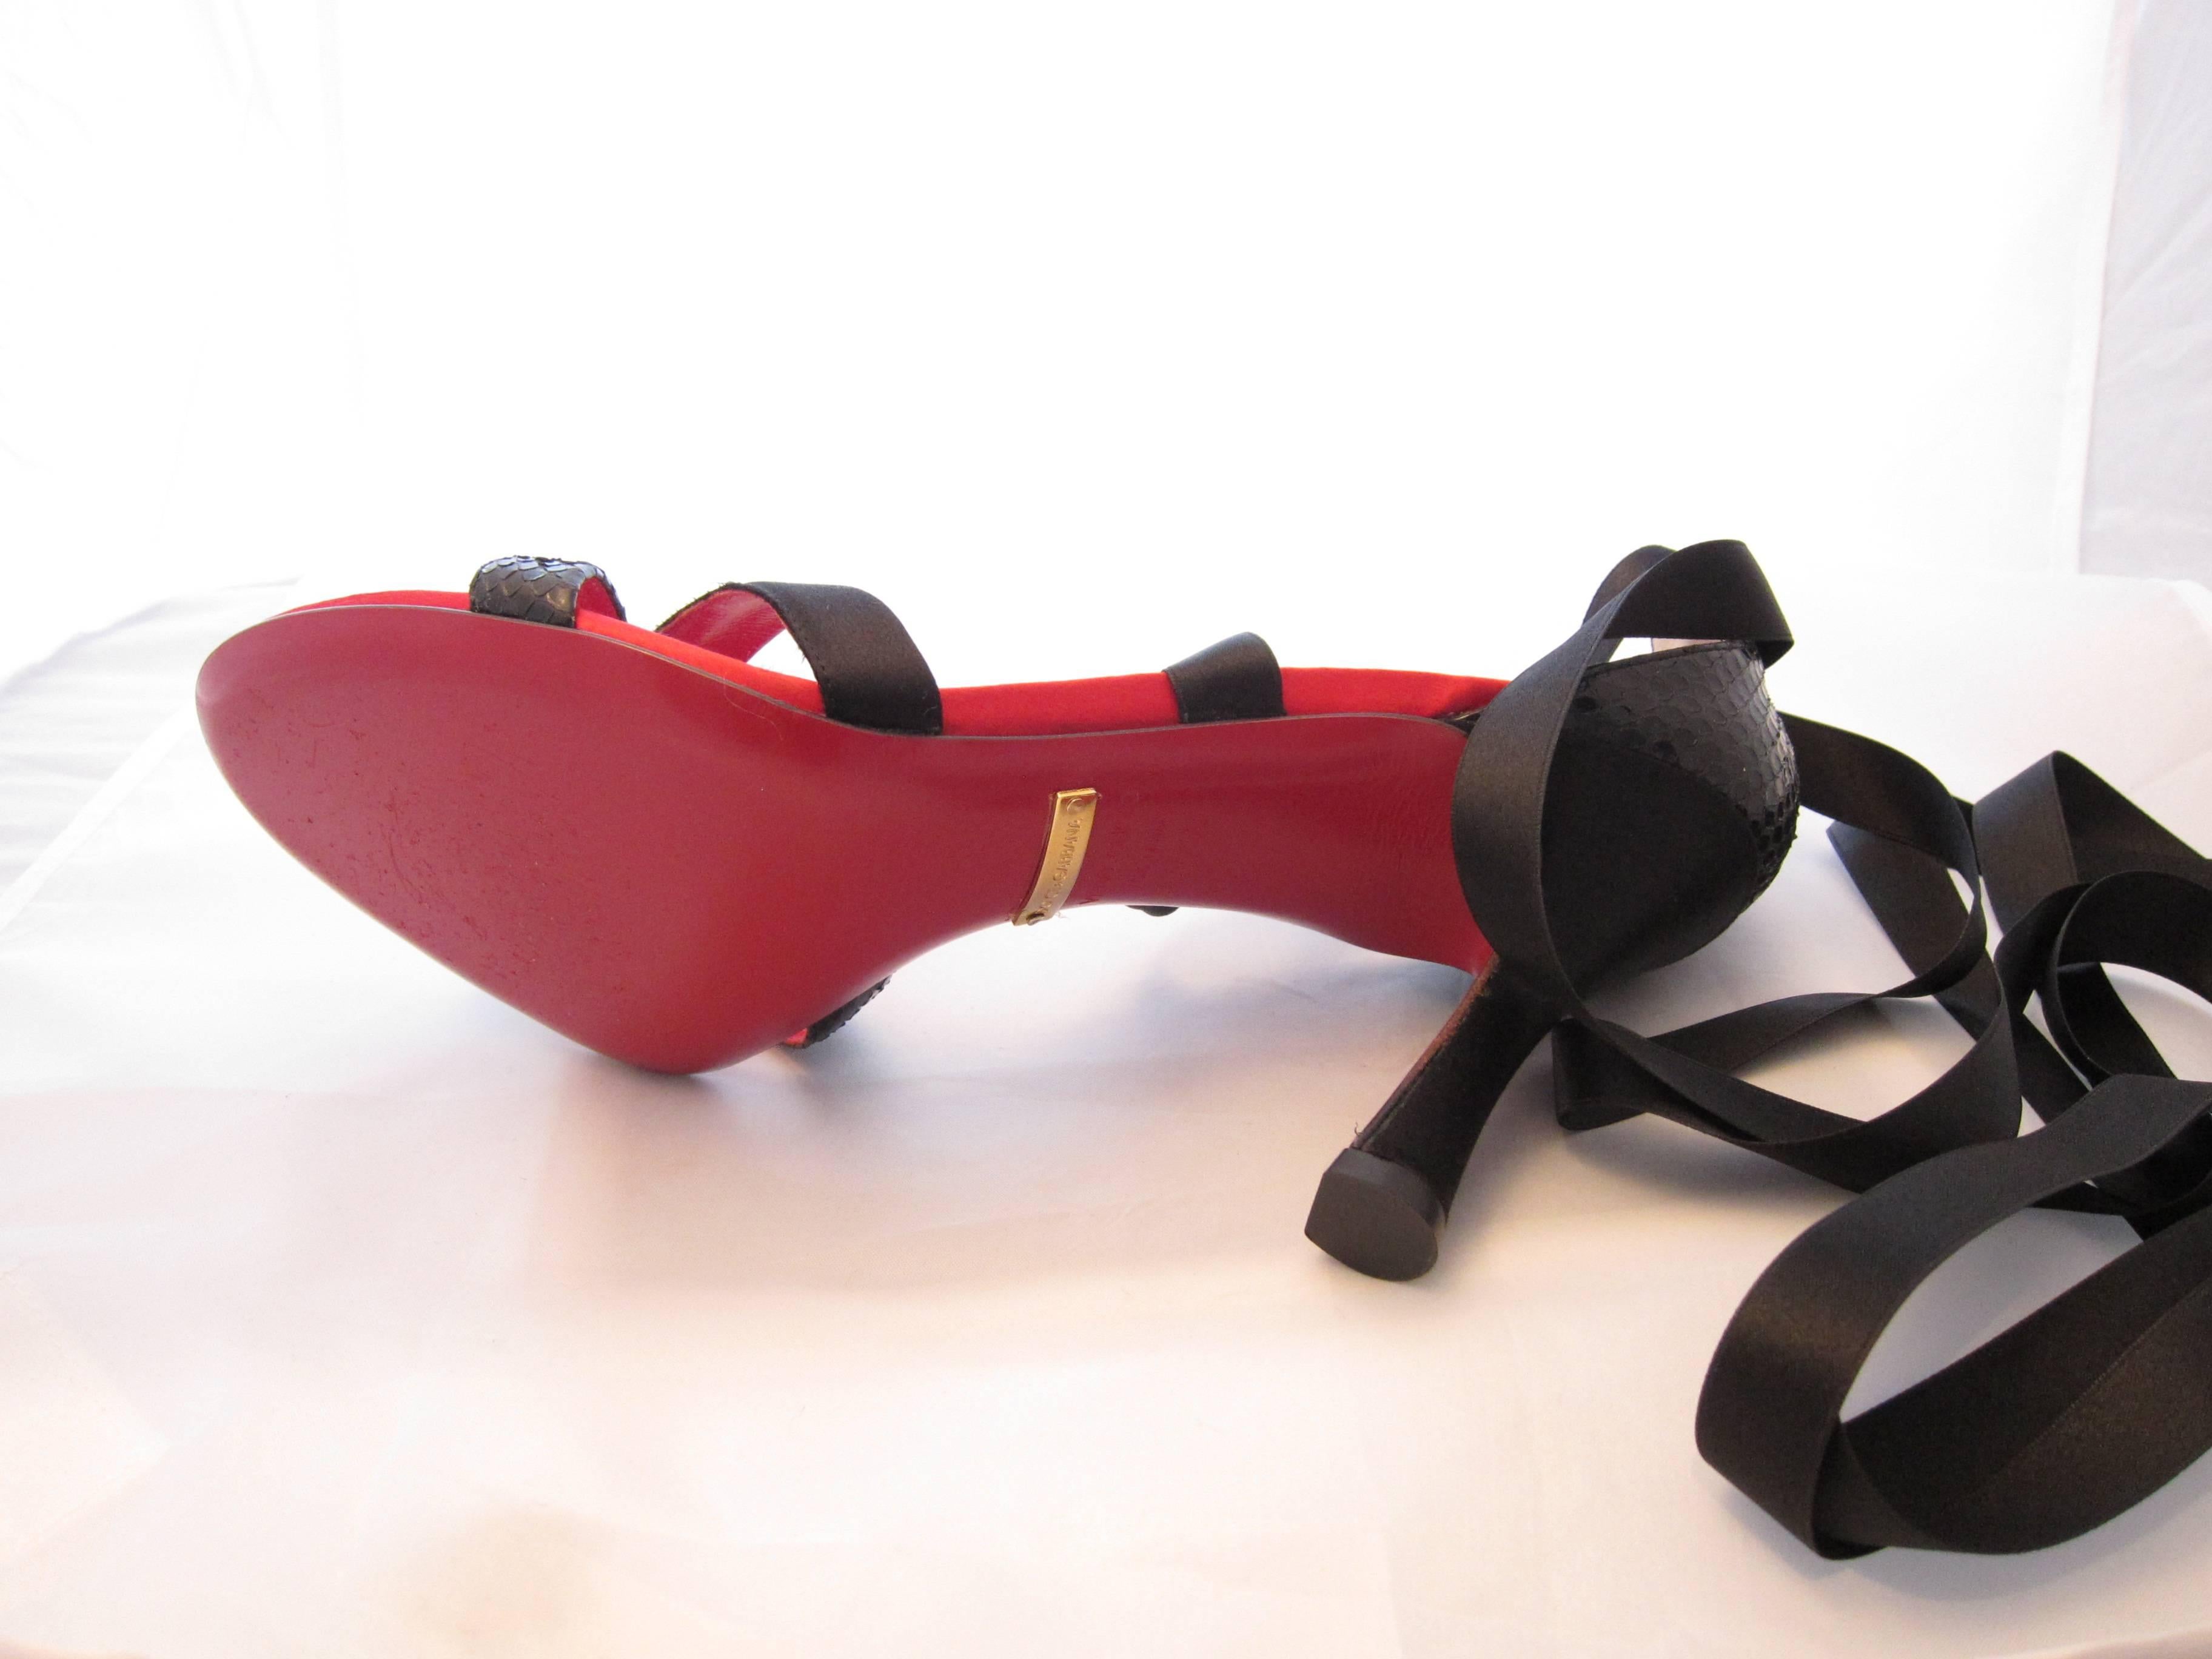 Awesome pair of Dolce and Gabbana sandals in red silk and black leather.
Size european 37,5 ( sole 24,5 cm)
Heel: 9 cm